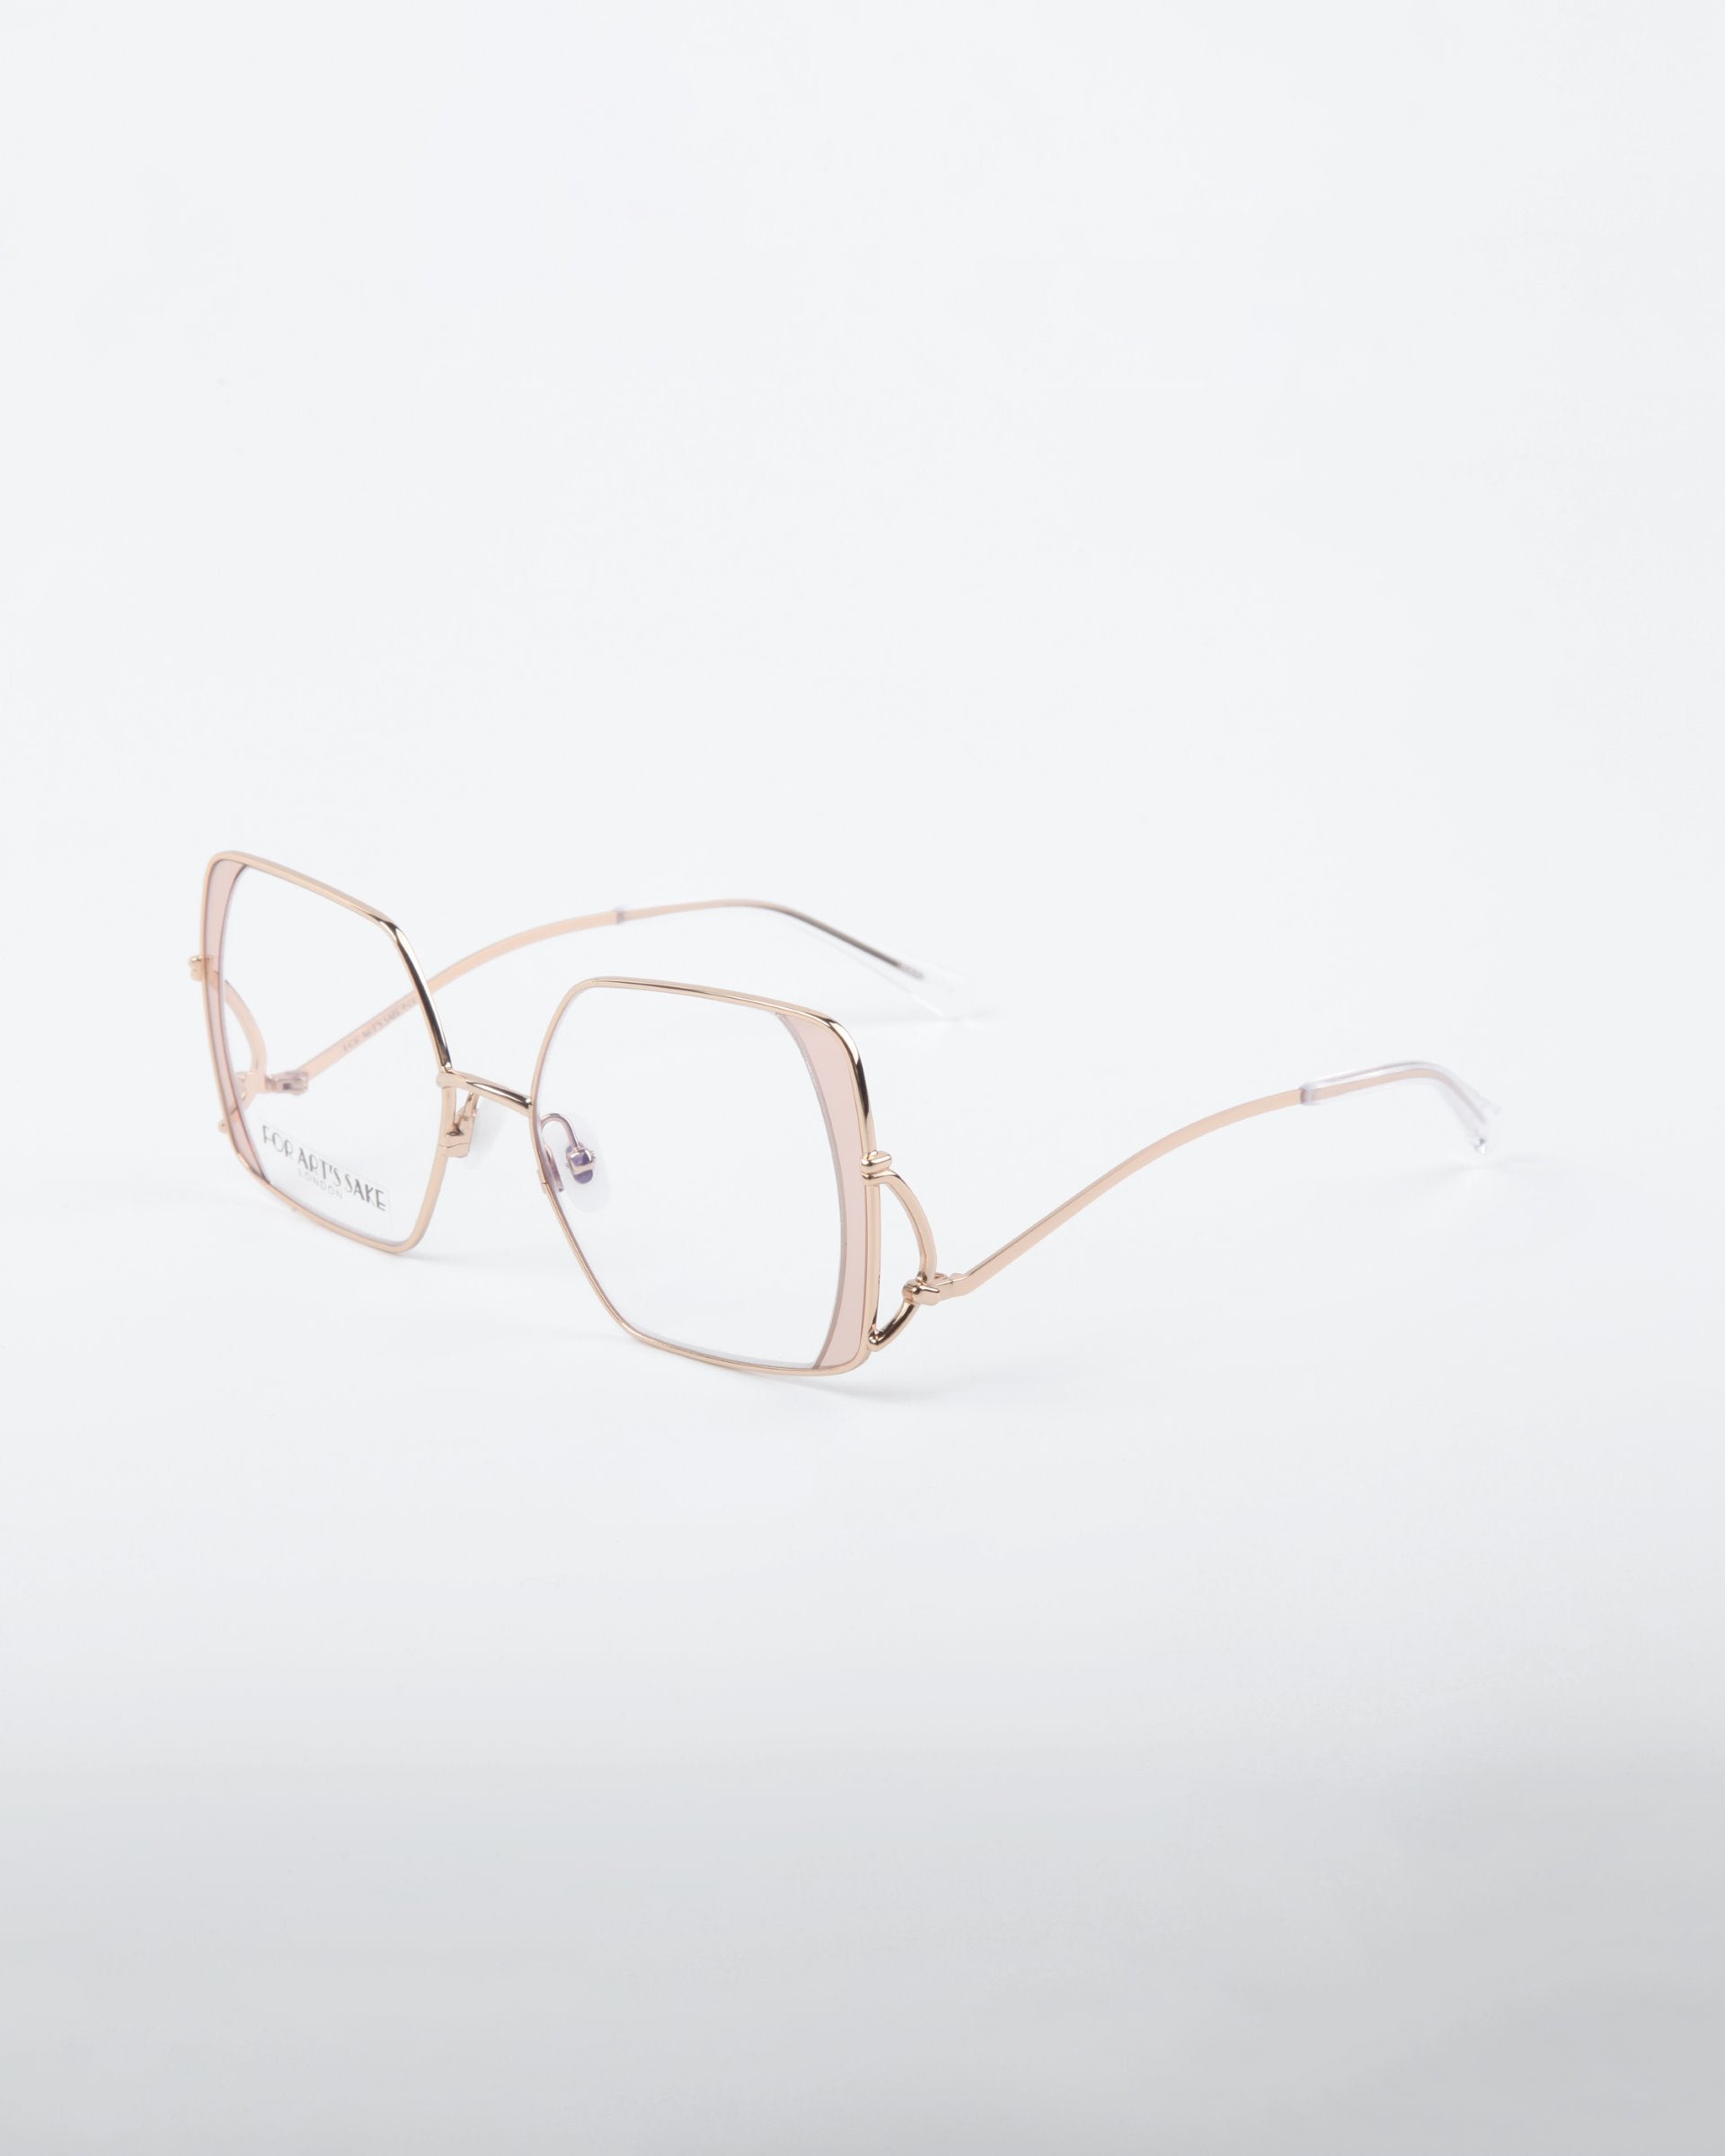 A pair of gold-rimmed, geometric eyeglasses with clear lenses is displayed on a plain white background. The Candy glasses from For Art&#39;s Sake® feature distinctive angular frames, thin, delicate arms, and are crafted from high-quality stainless steel.